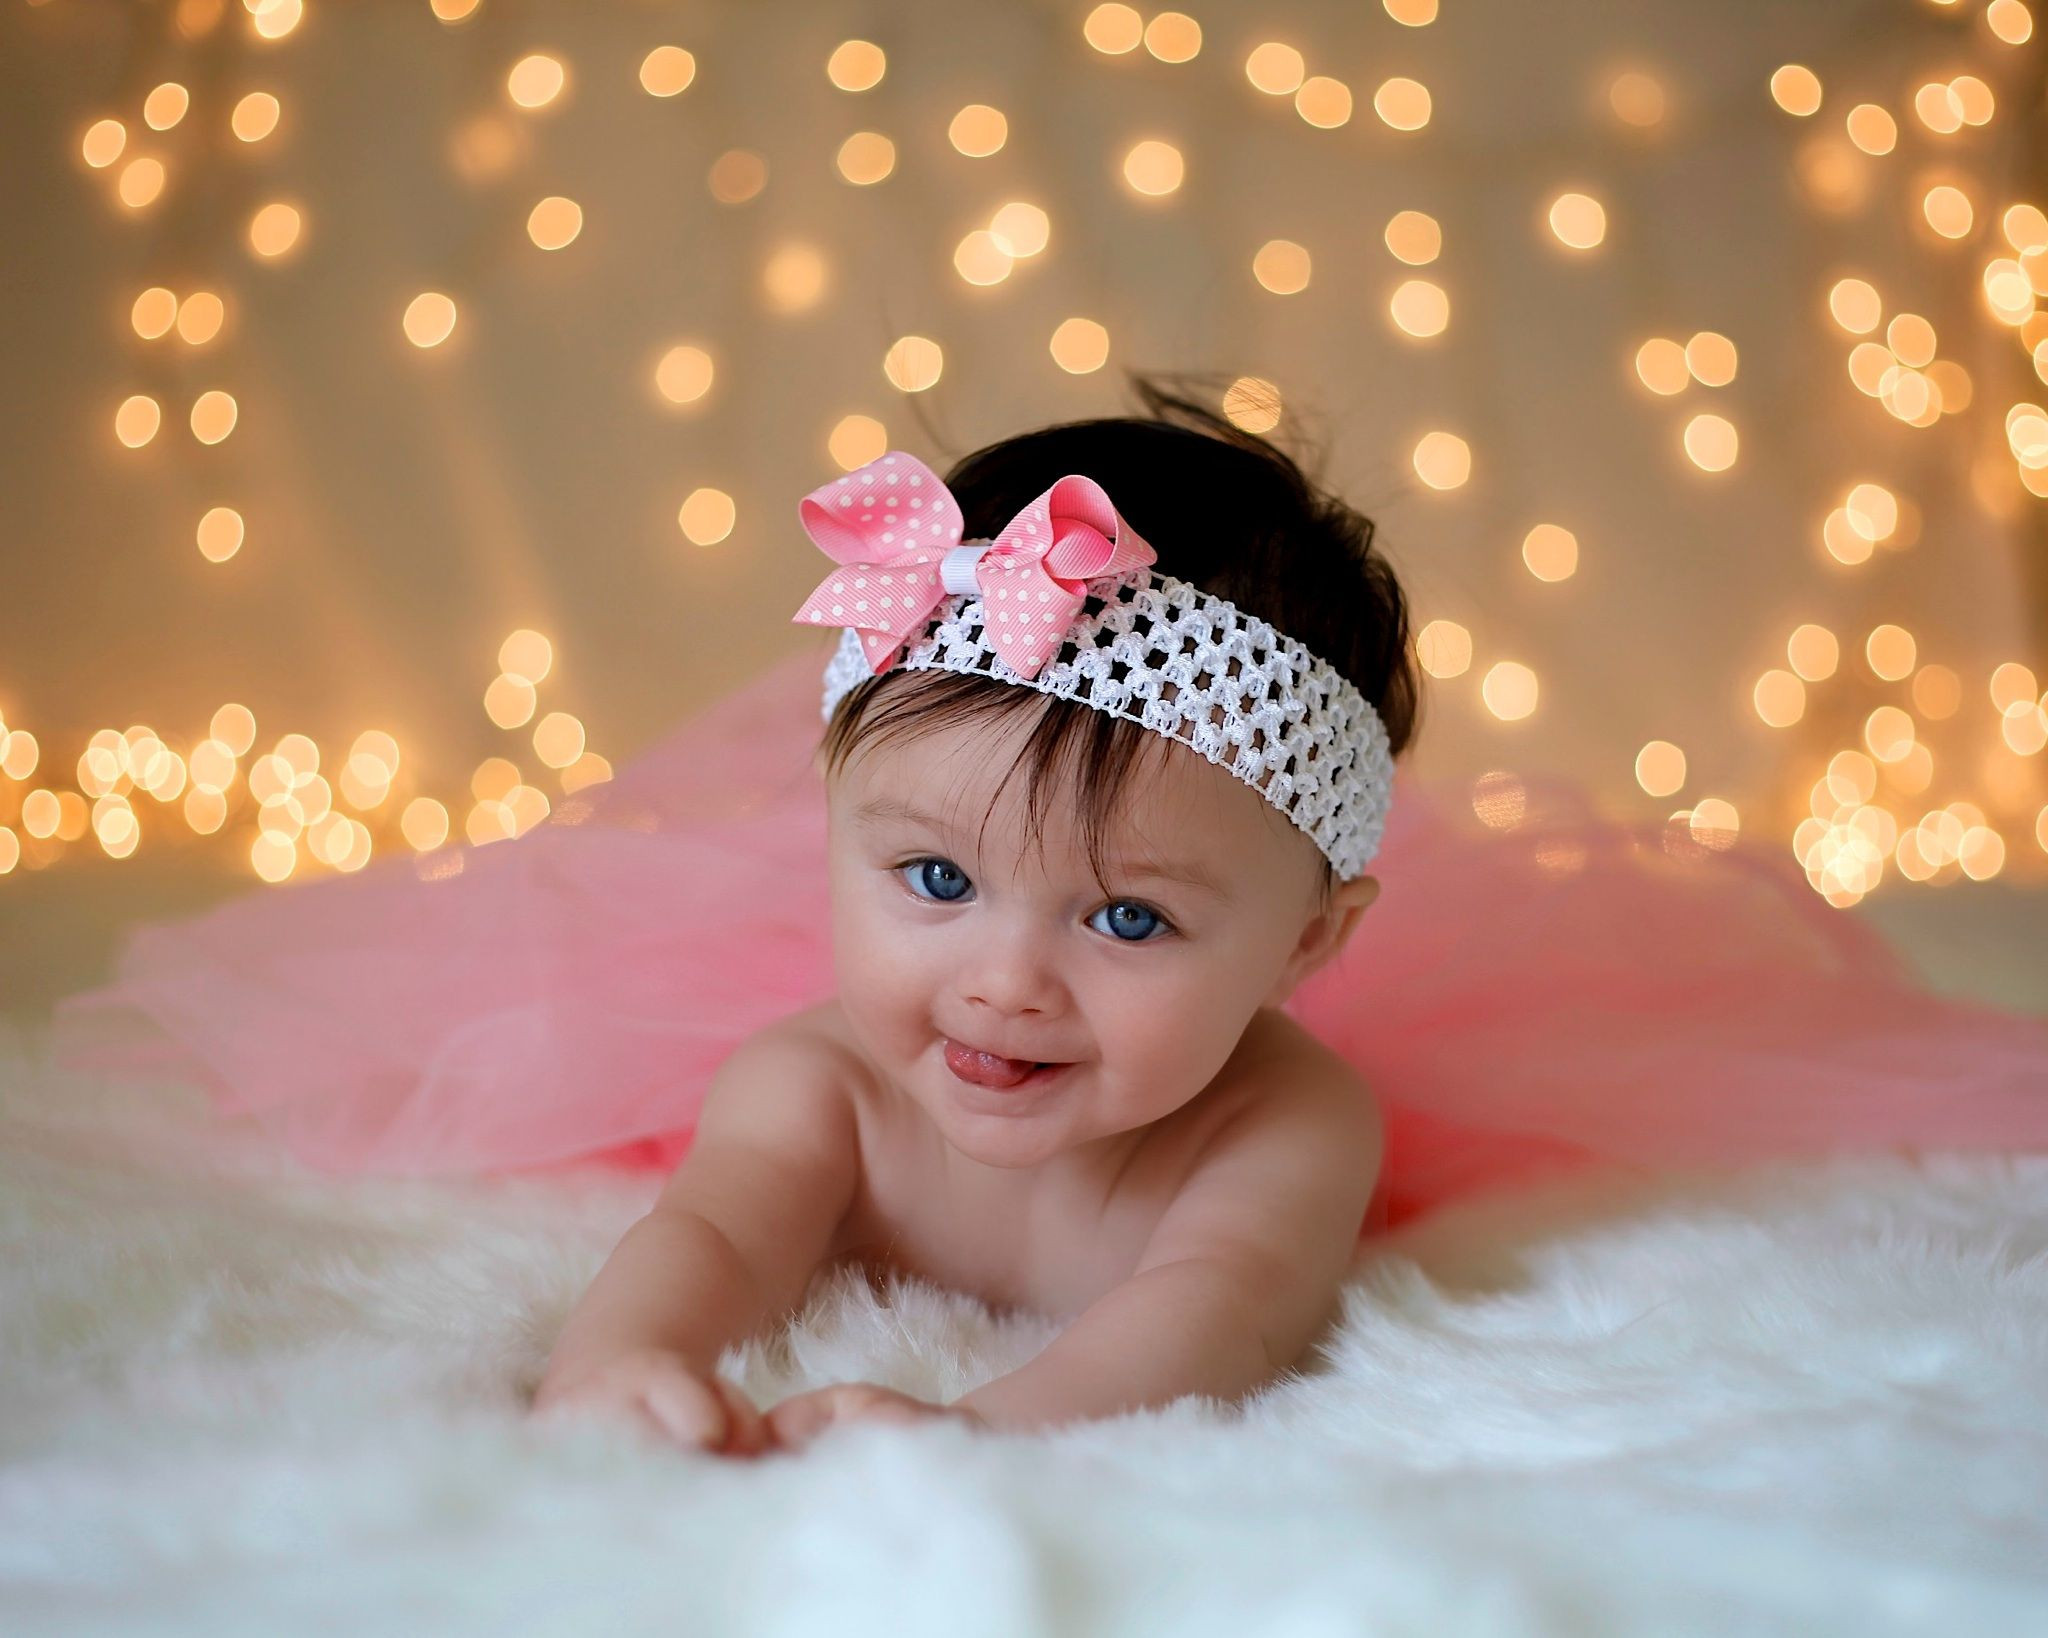 Christmas Gift Ideas For 6 Month Baby Girl
 Child portrait idea Hayden s six month photos Using